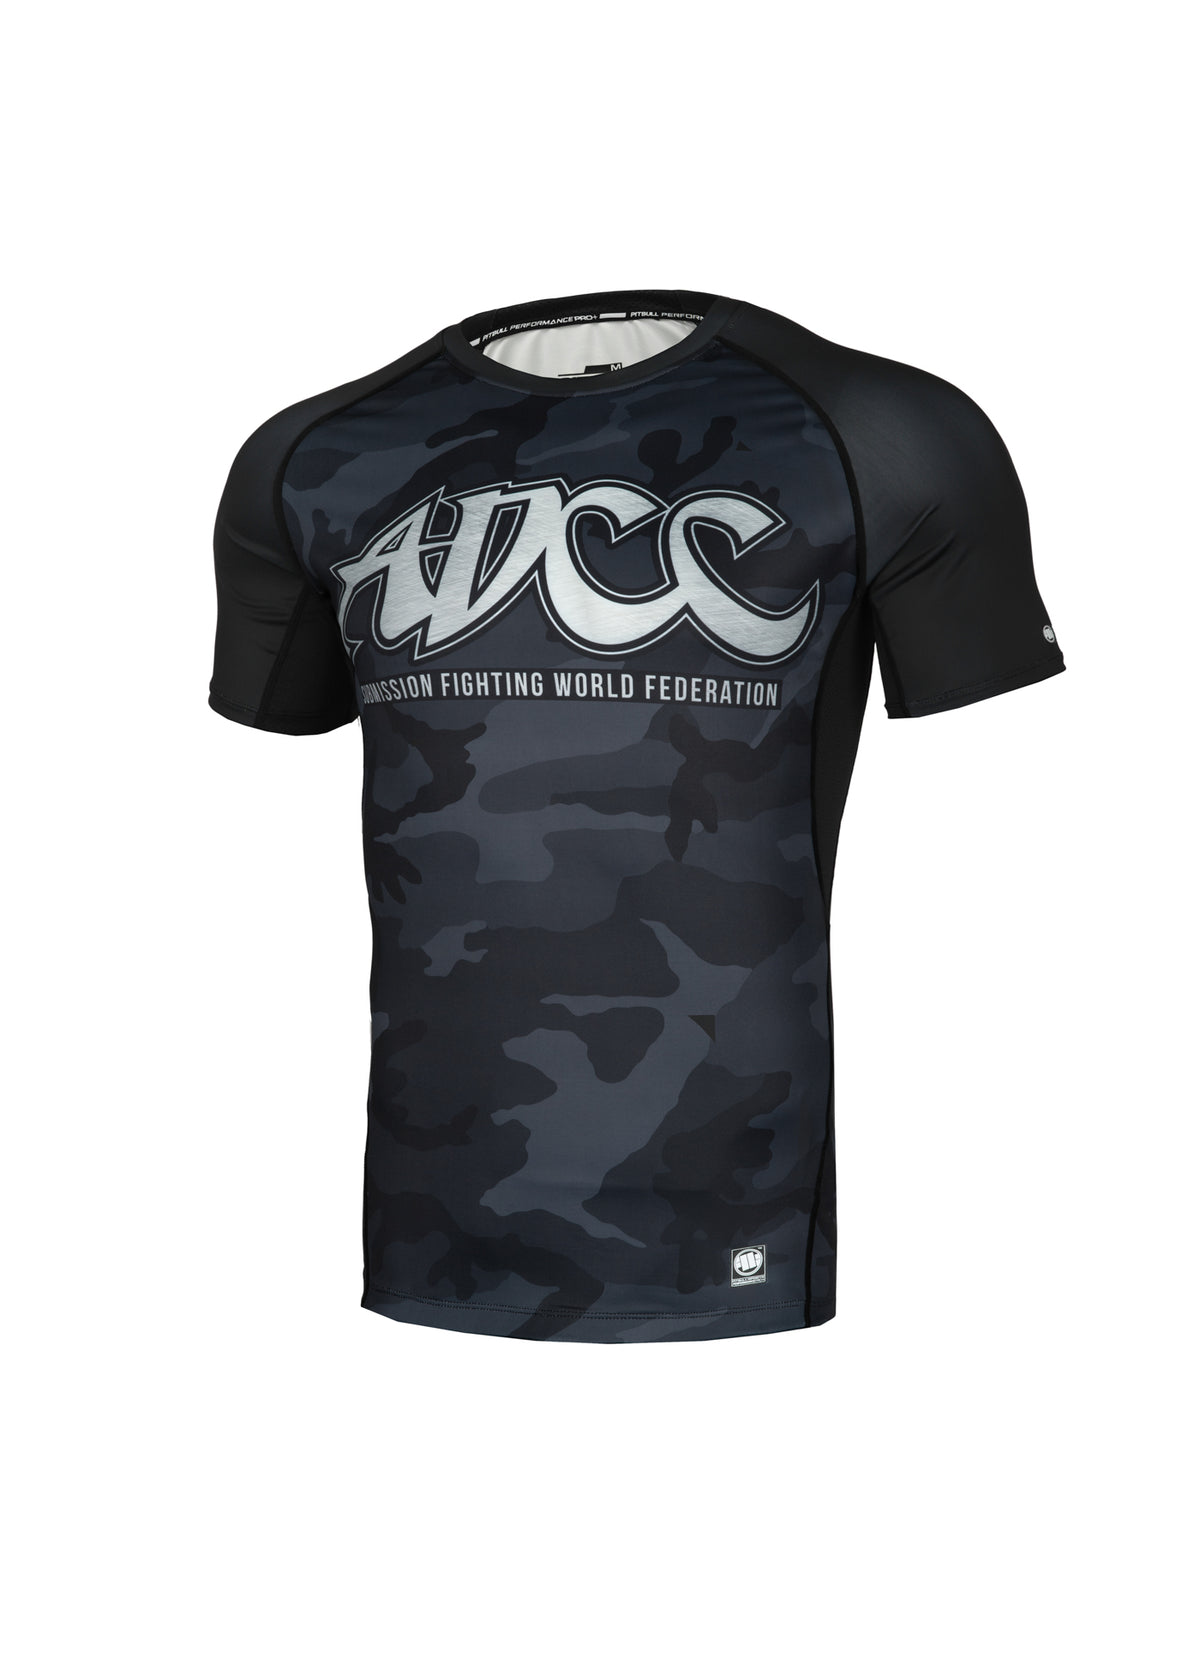 ADCC fitted  All Black Camo Rash Guard.